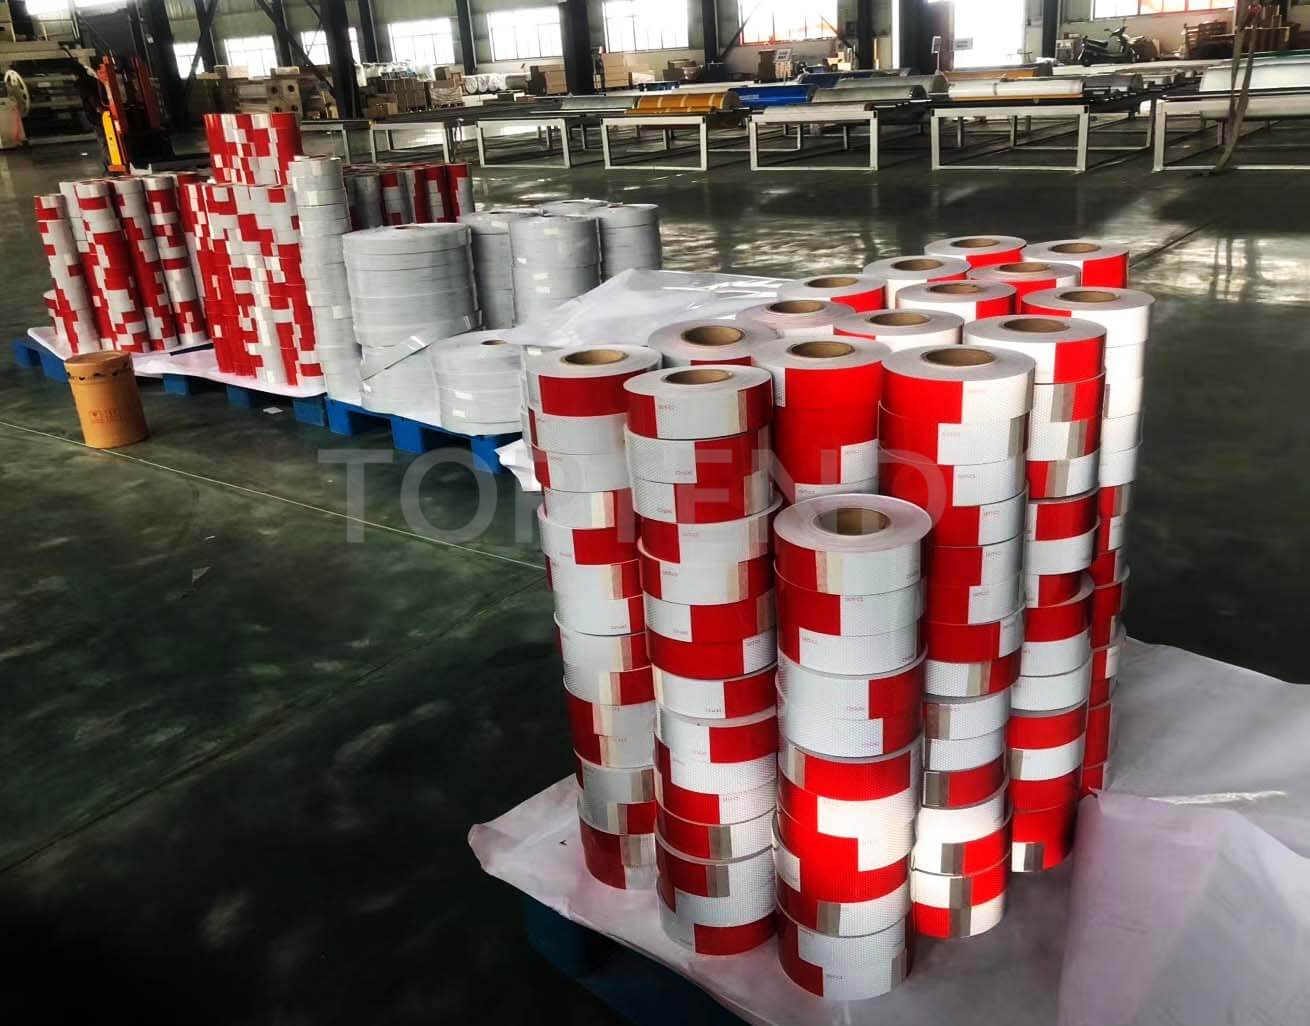 best quality high intensity reflective conspicuity tape from China manufacturer, as 3M alternative